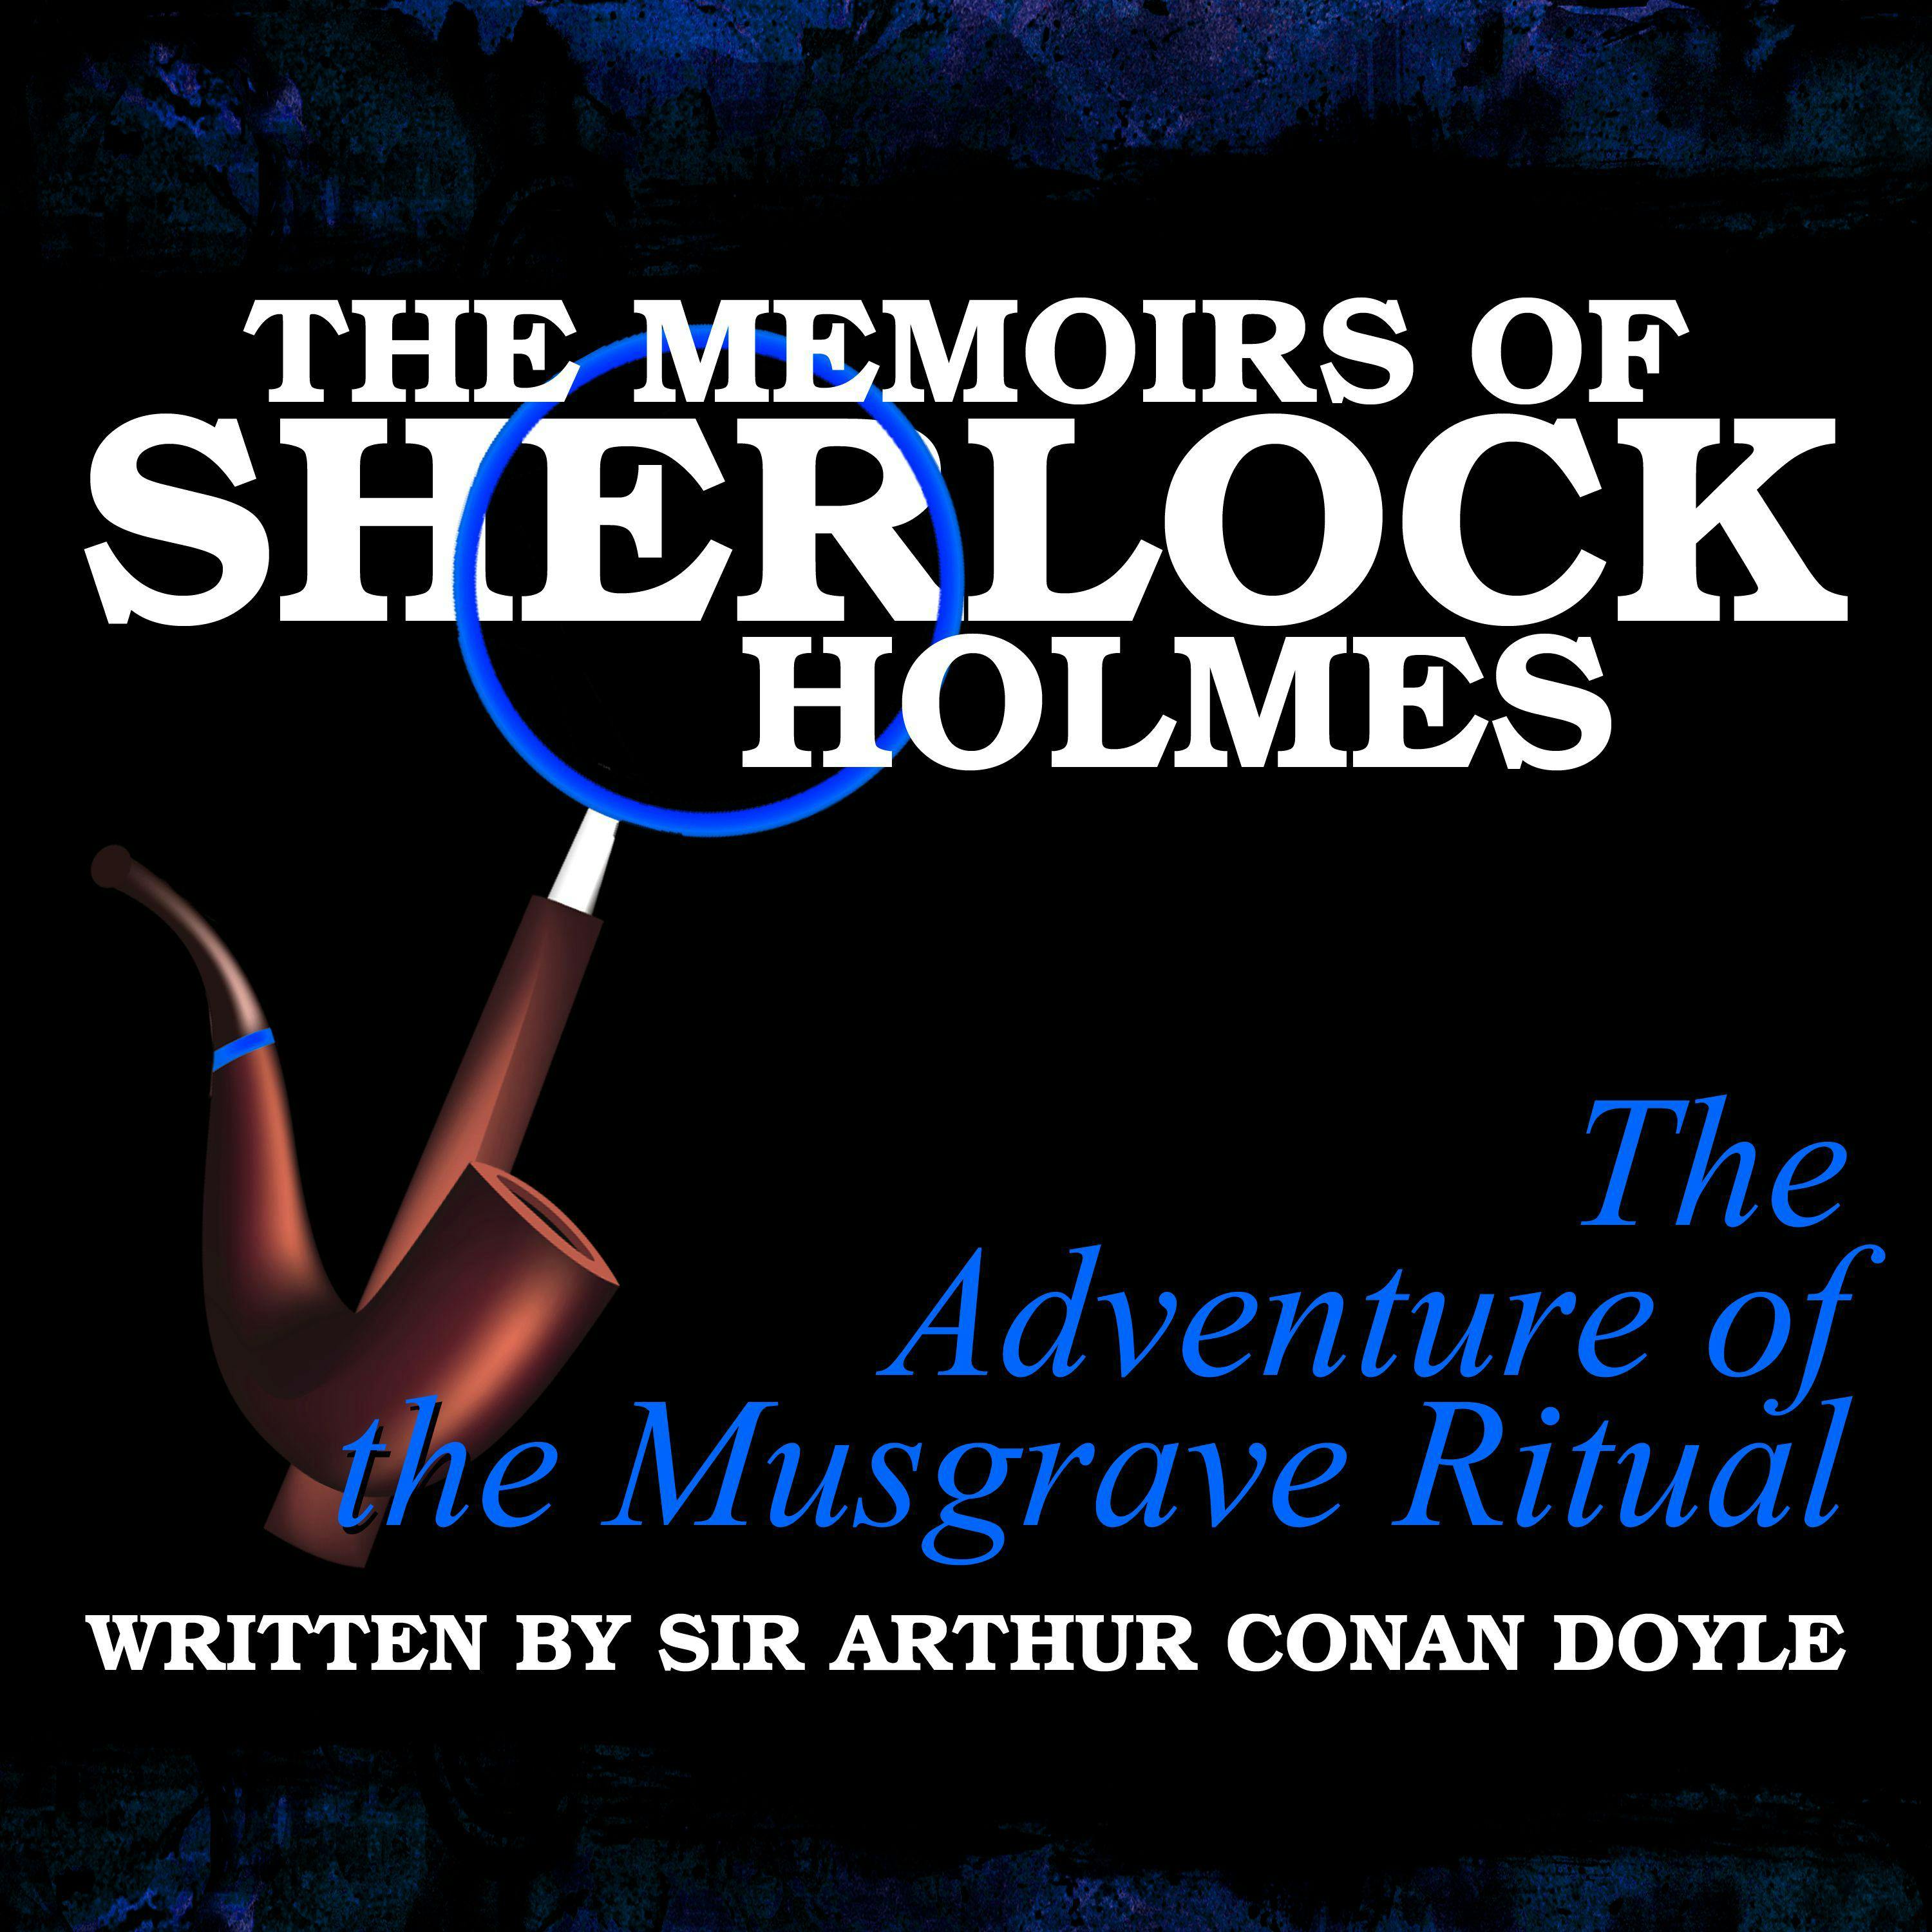 The Memoirs of Sherlock Holmes: The Adventure of the Musgrave Ritual - undefined